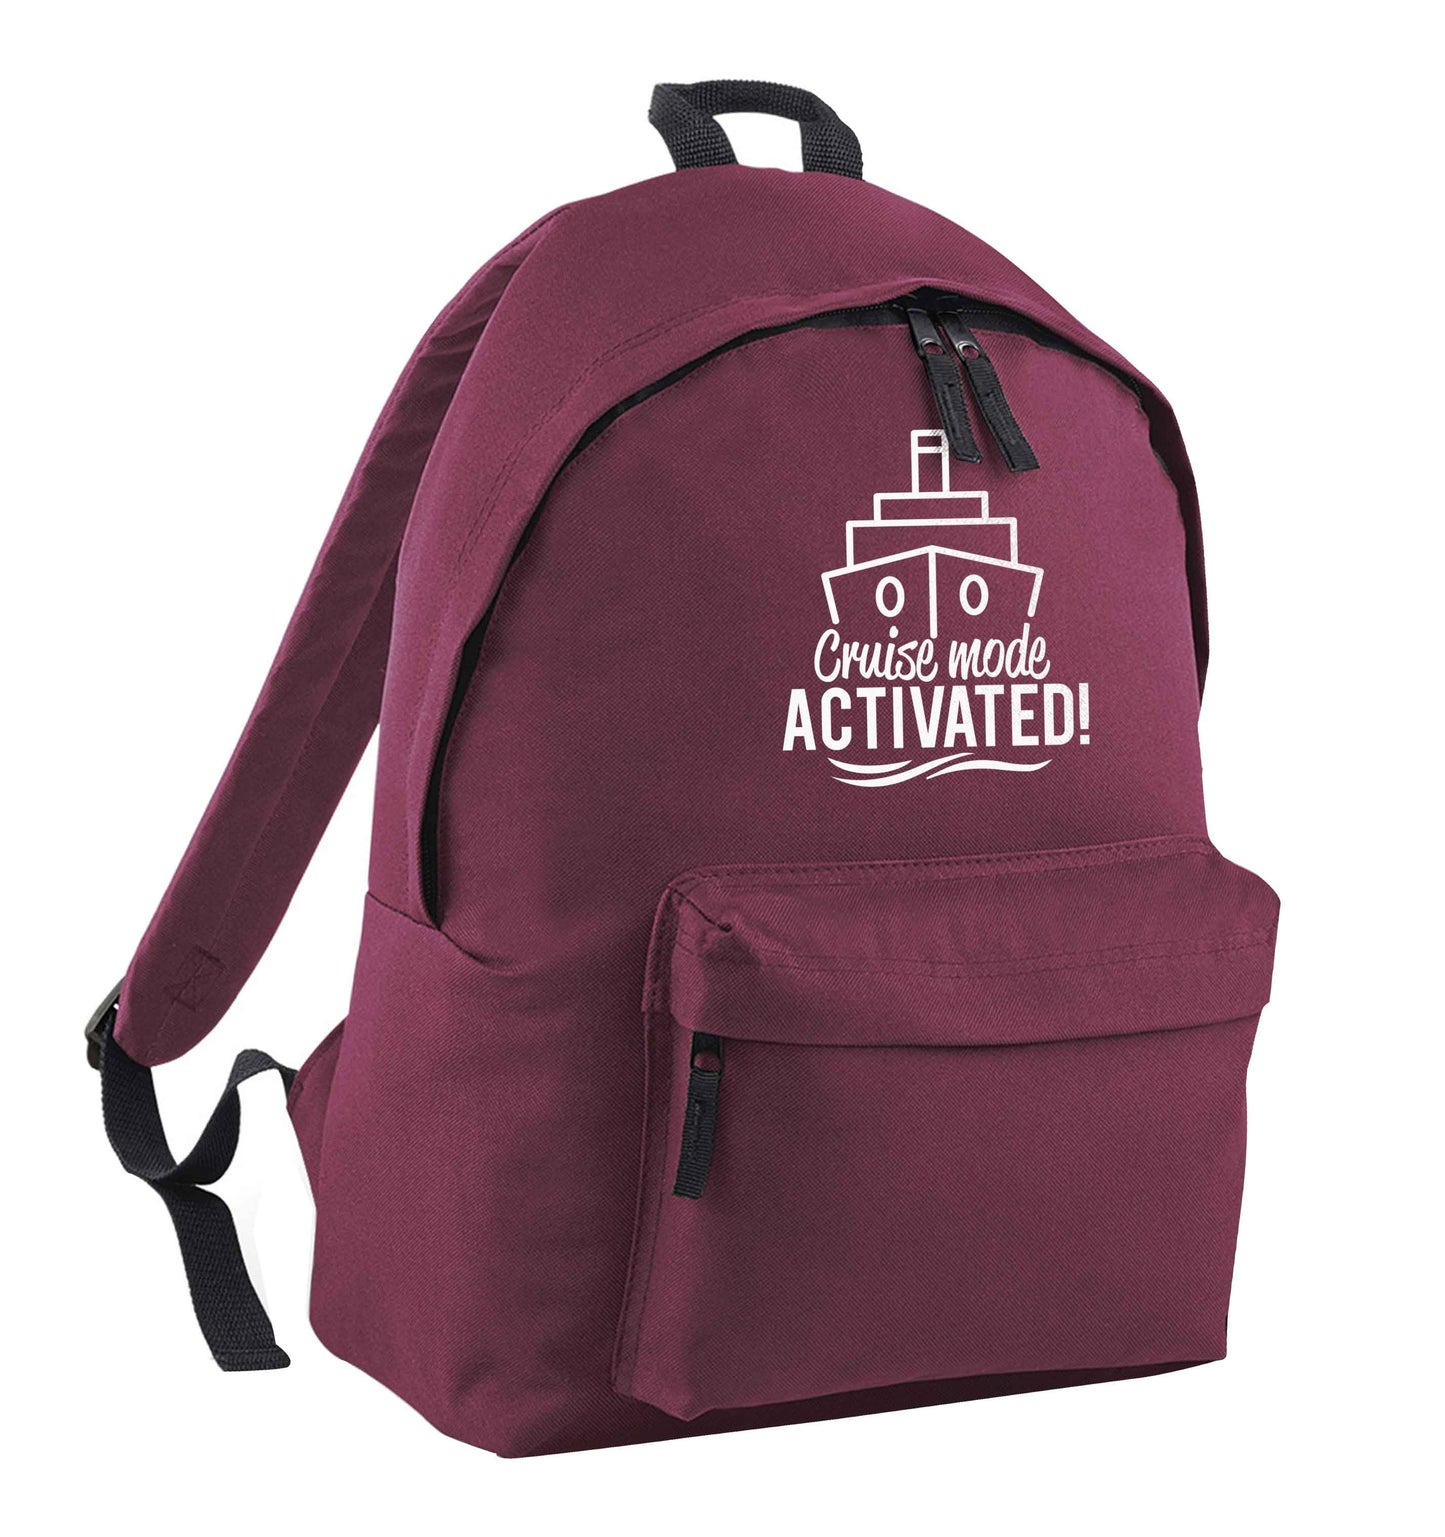 Cruise mode activated maroon adults backpack